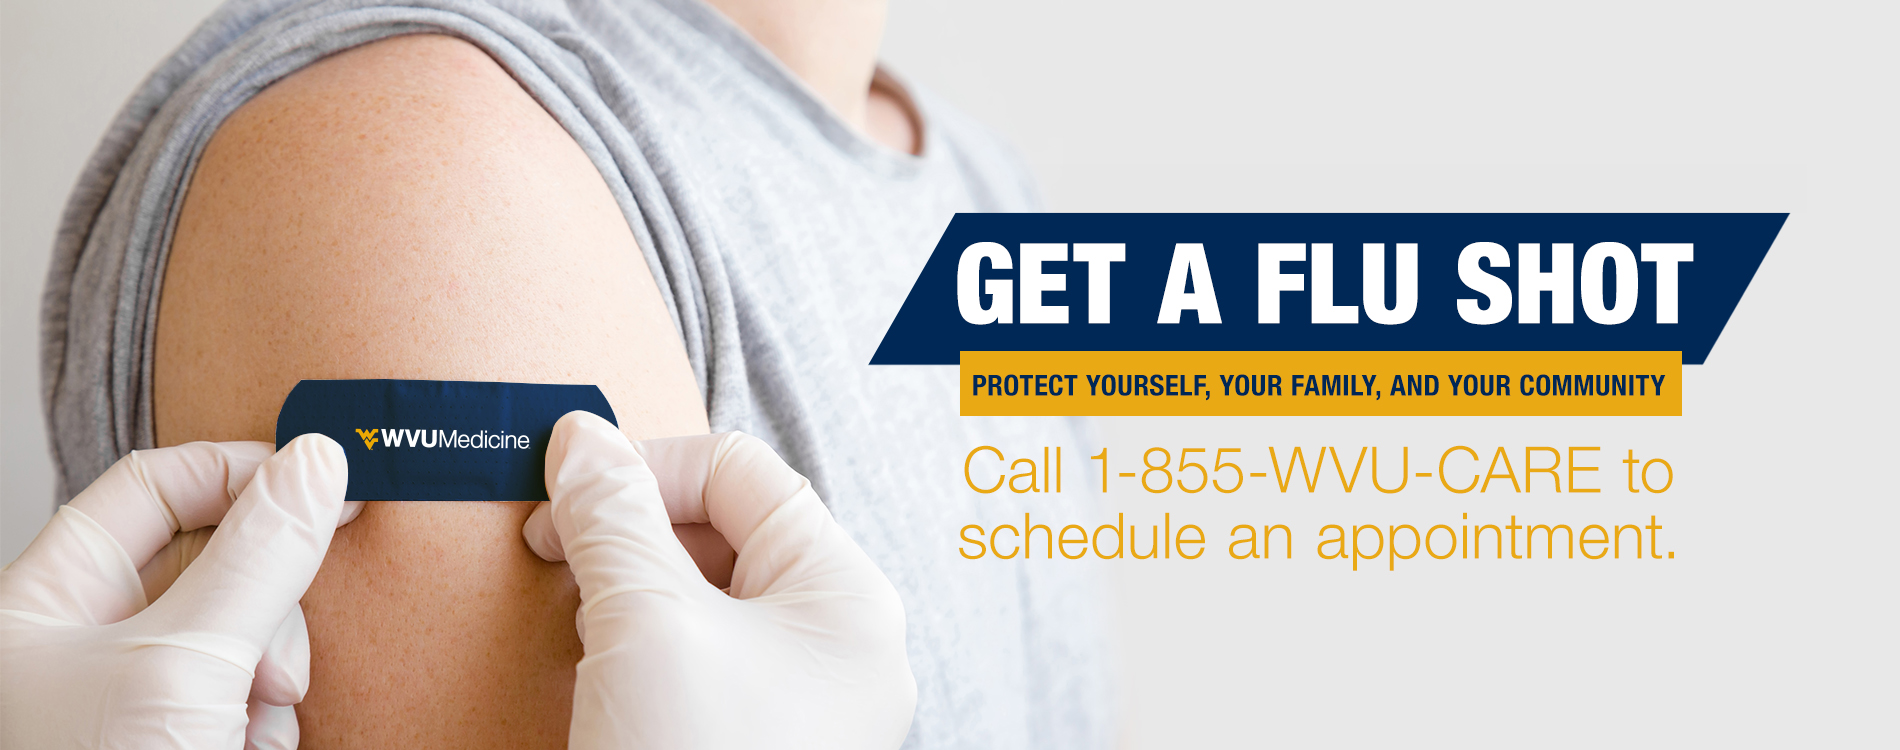 Get a flu shot. Protect yourself, your family, and your community.